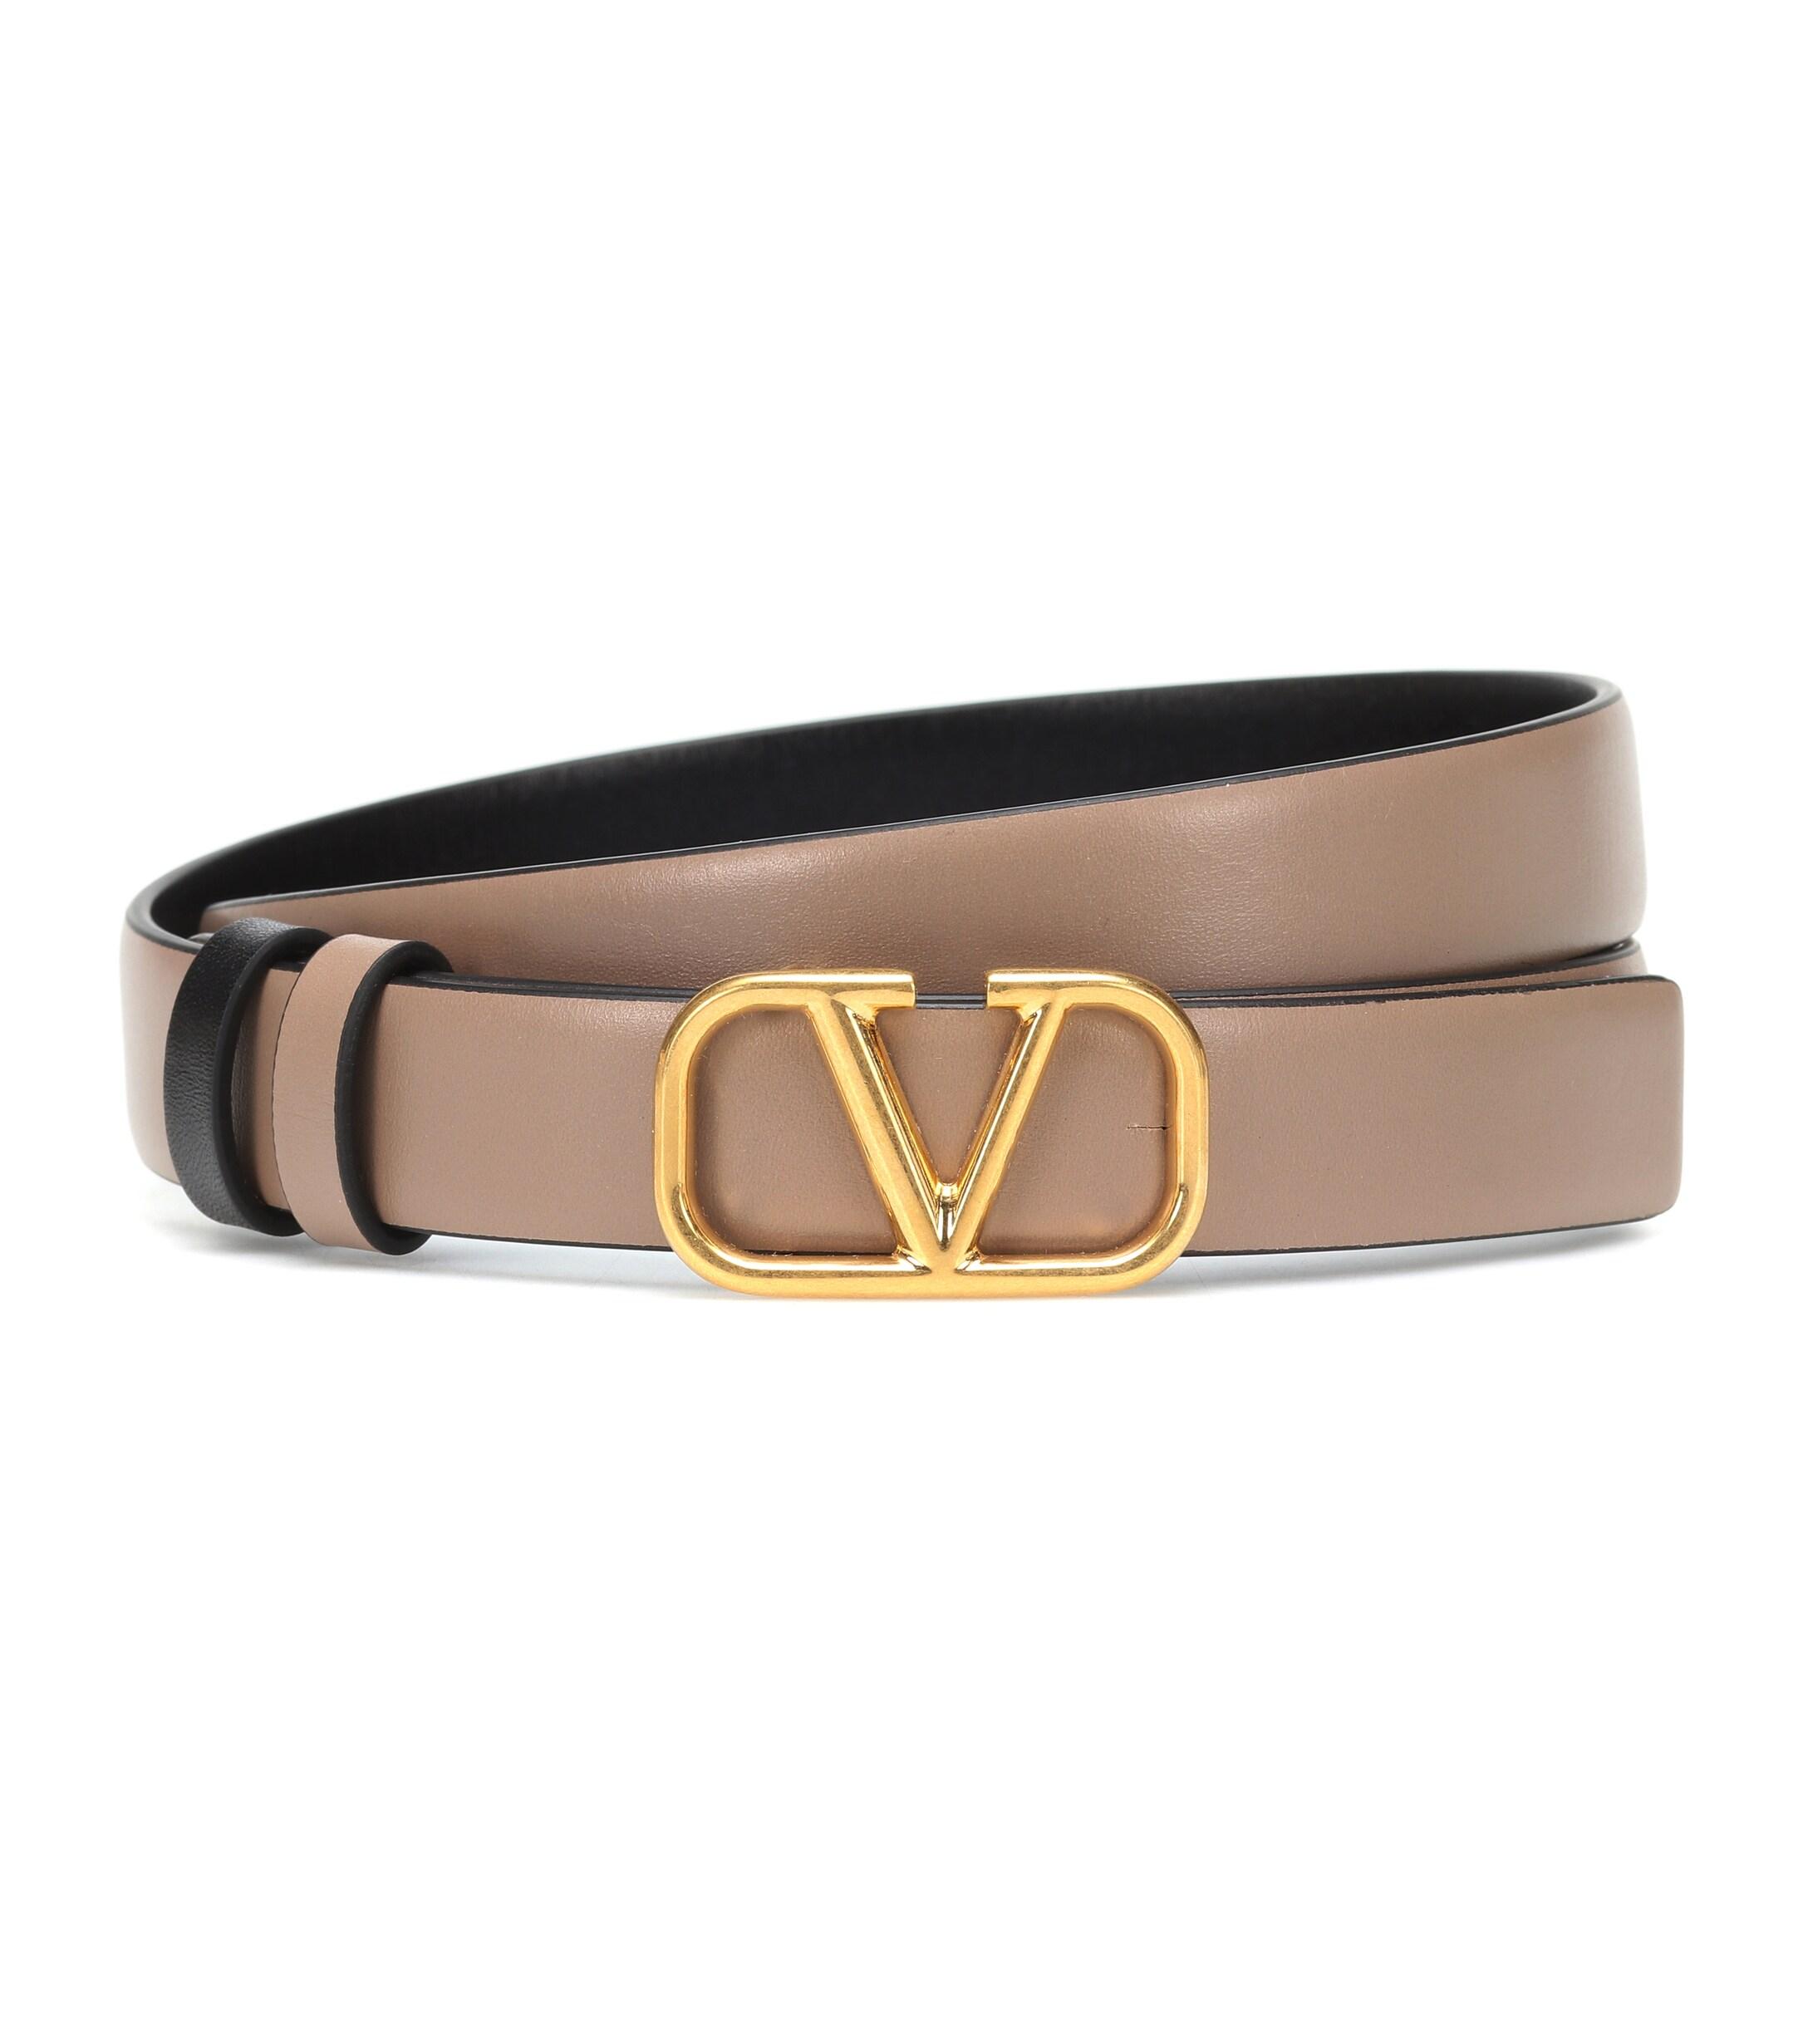 Valentino Vlogo Leather Belt in Natural - Lyst